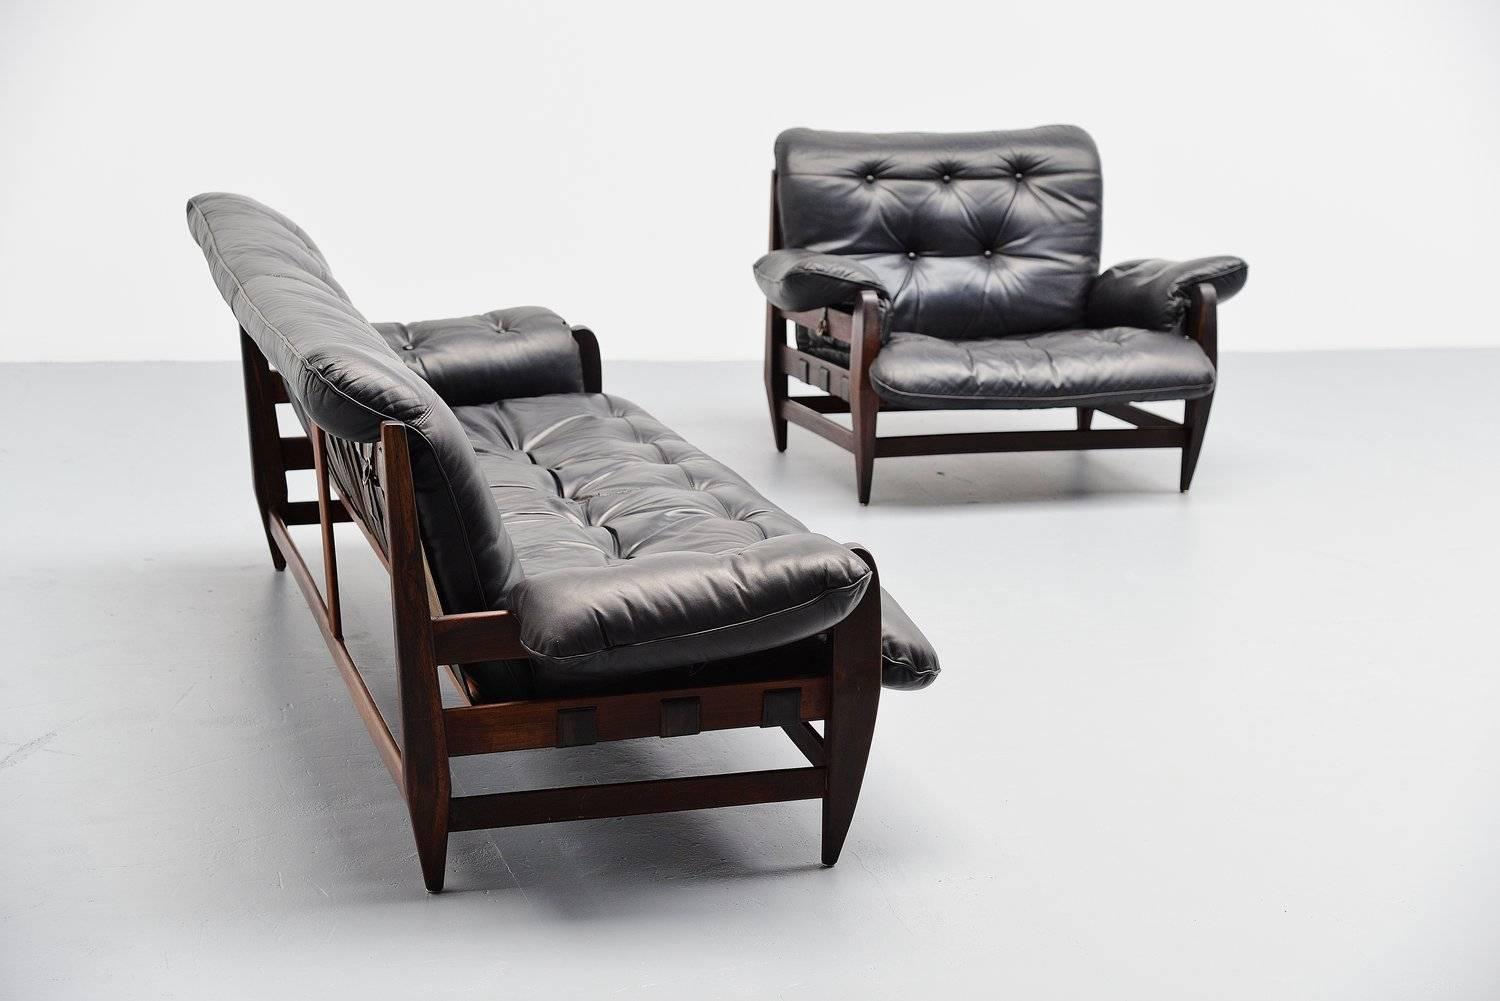 Fantastic sofa set designed by Jean Gillon for Italma Wood Art, Brazil 1965. This amazing set has a solid jacaranda rosewood frame and black leather padded cushions. The singles are made of black leather too and show a very nice patina. 2 Seems are